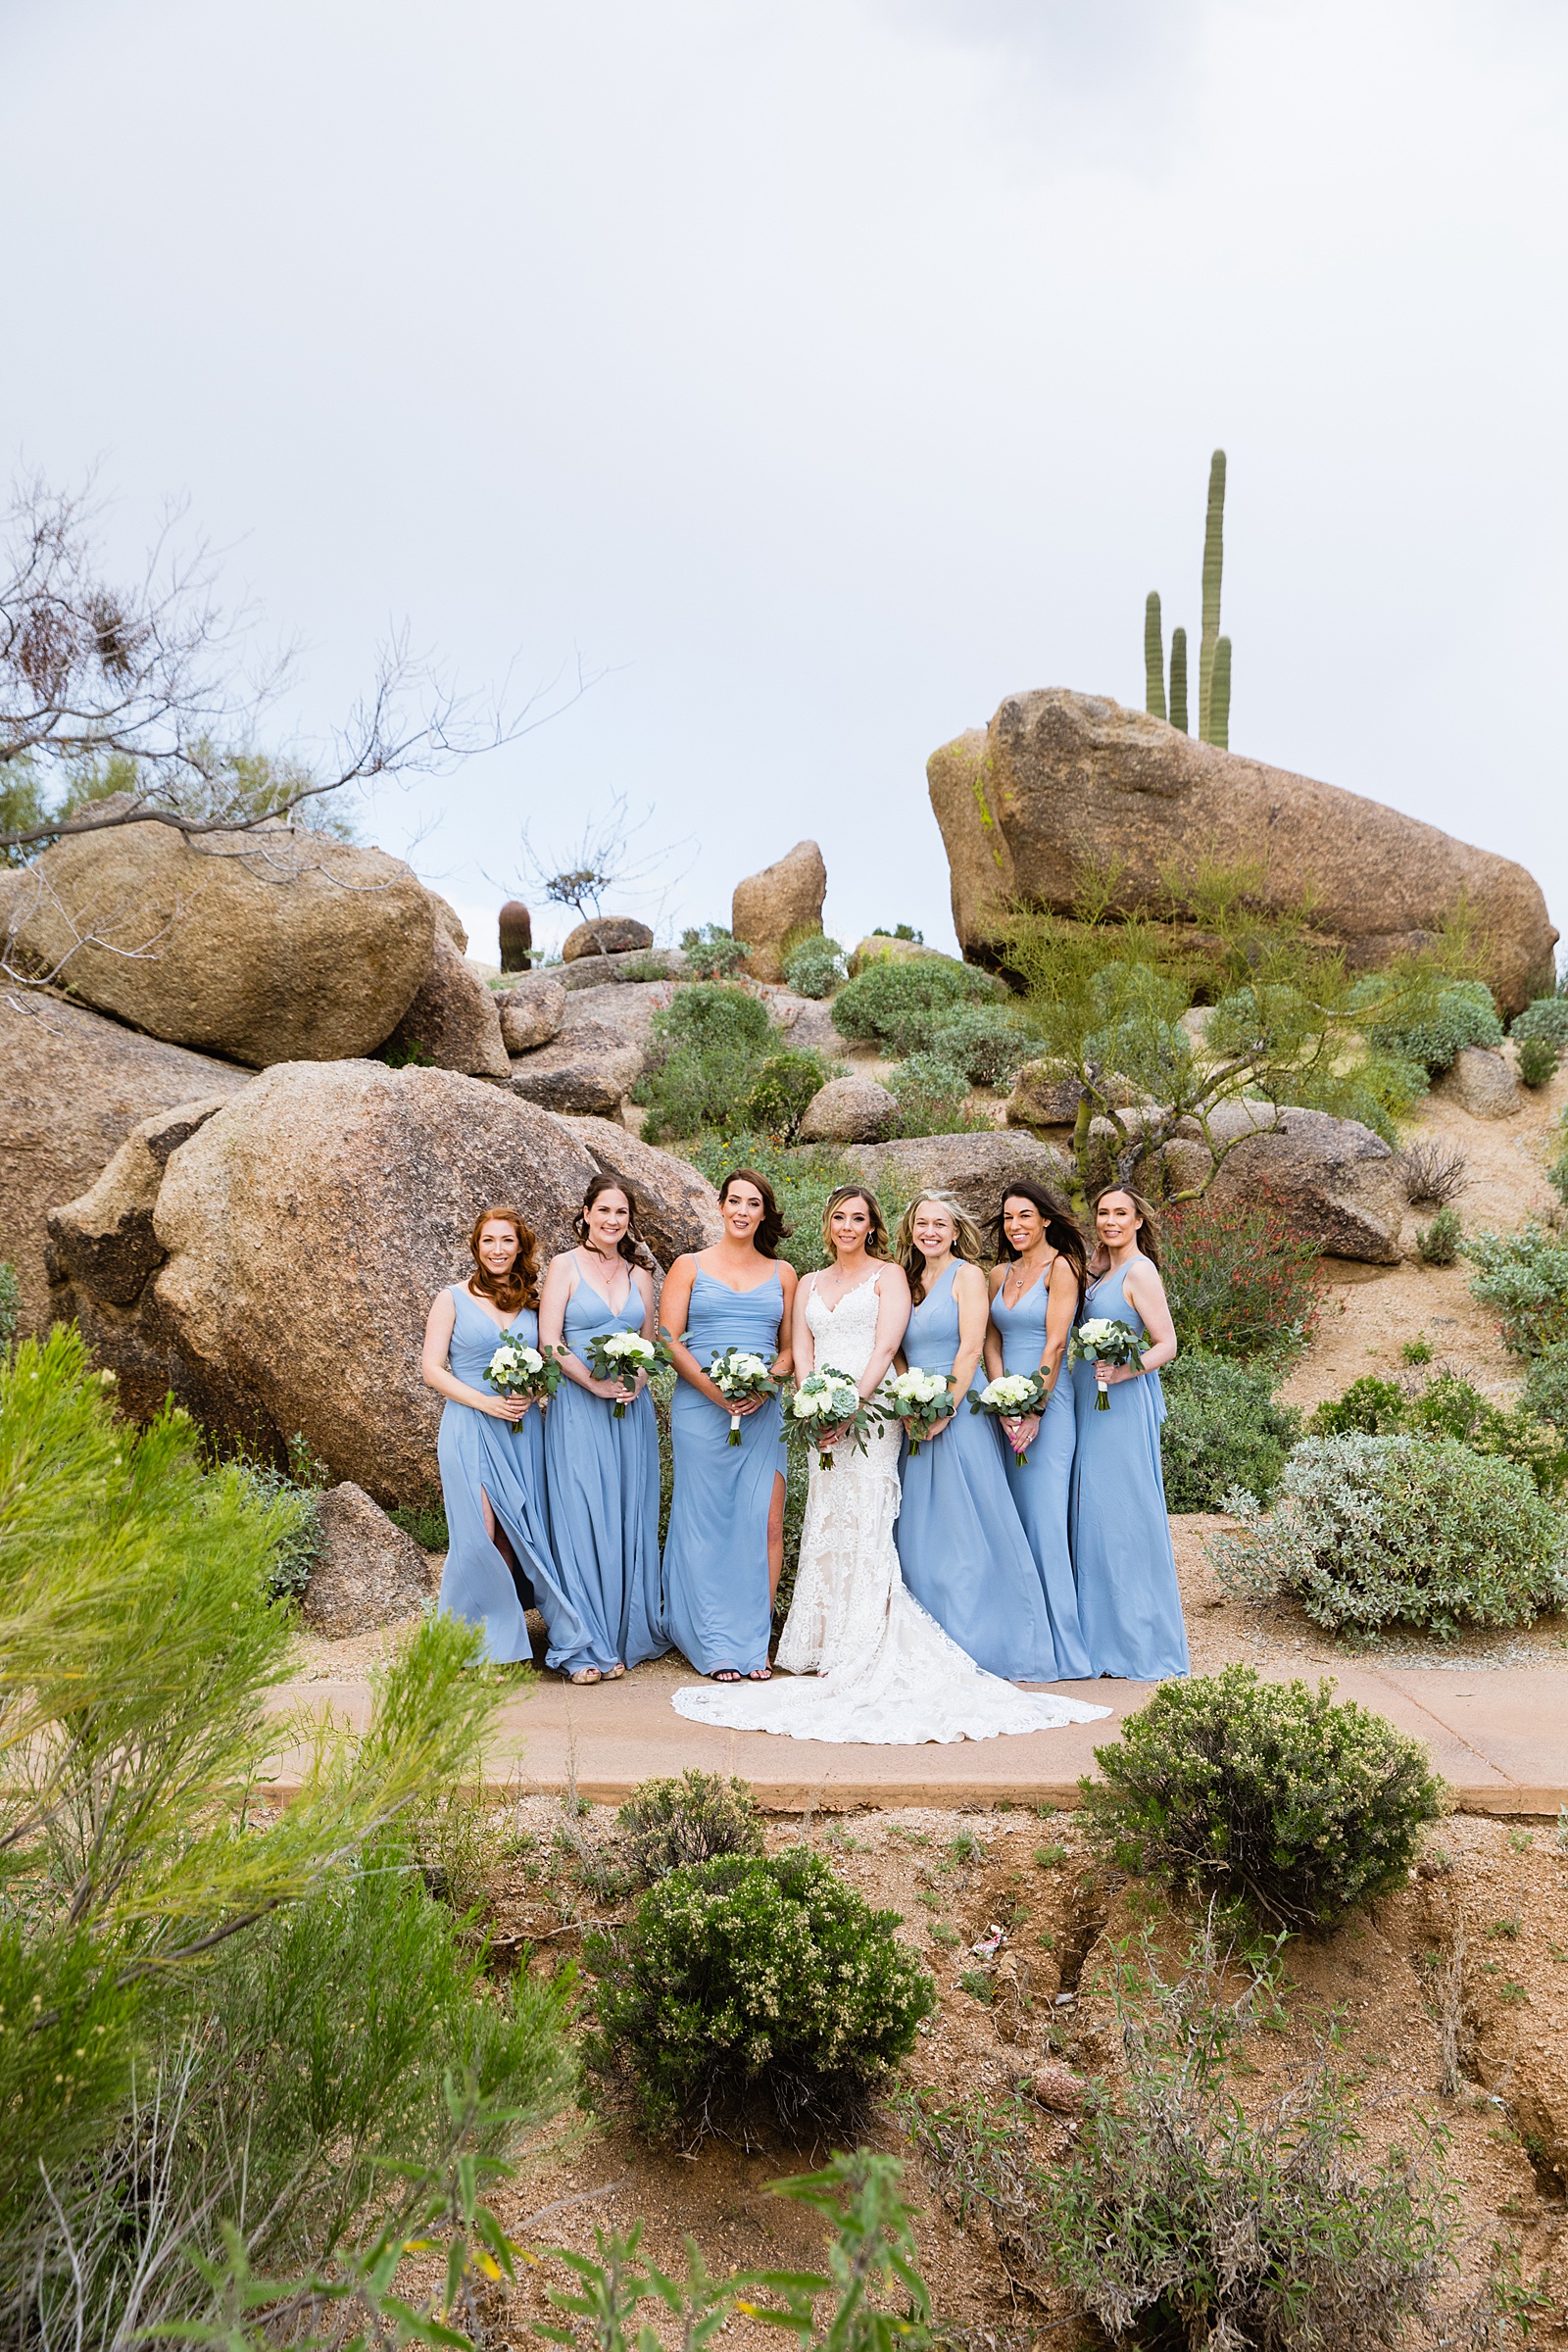 Bride and bridesmaids together at a Troon North wedding by Arizona wedding photographer PMA Photography.